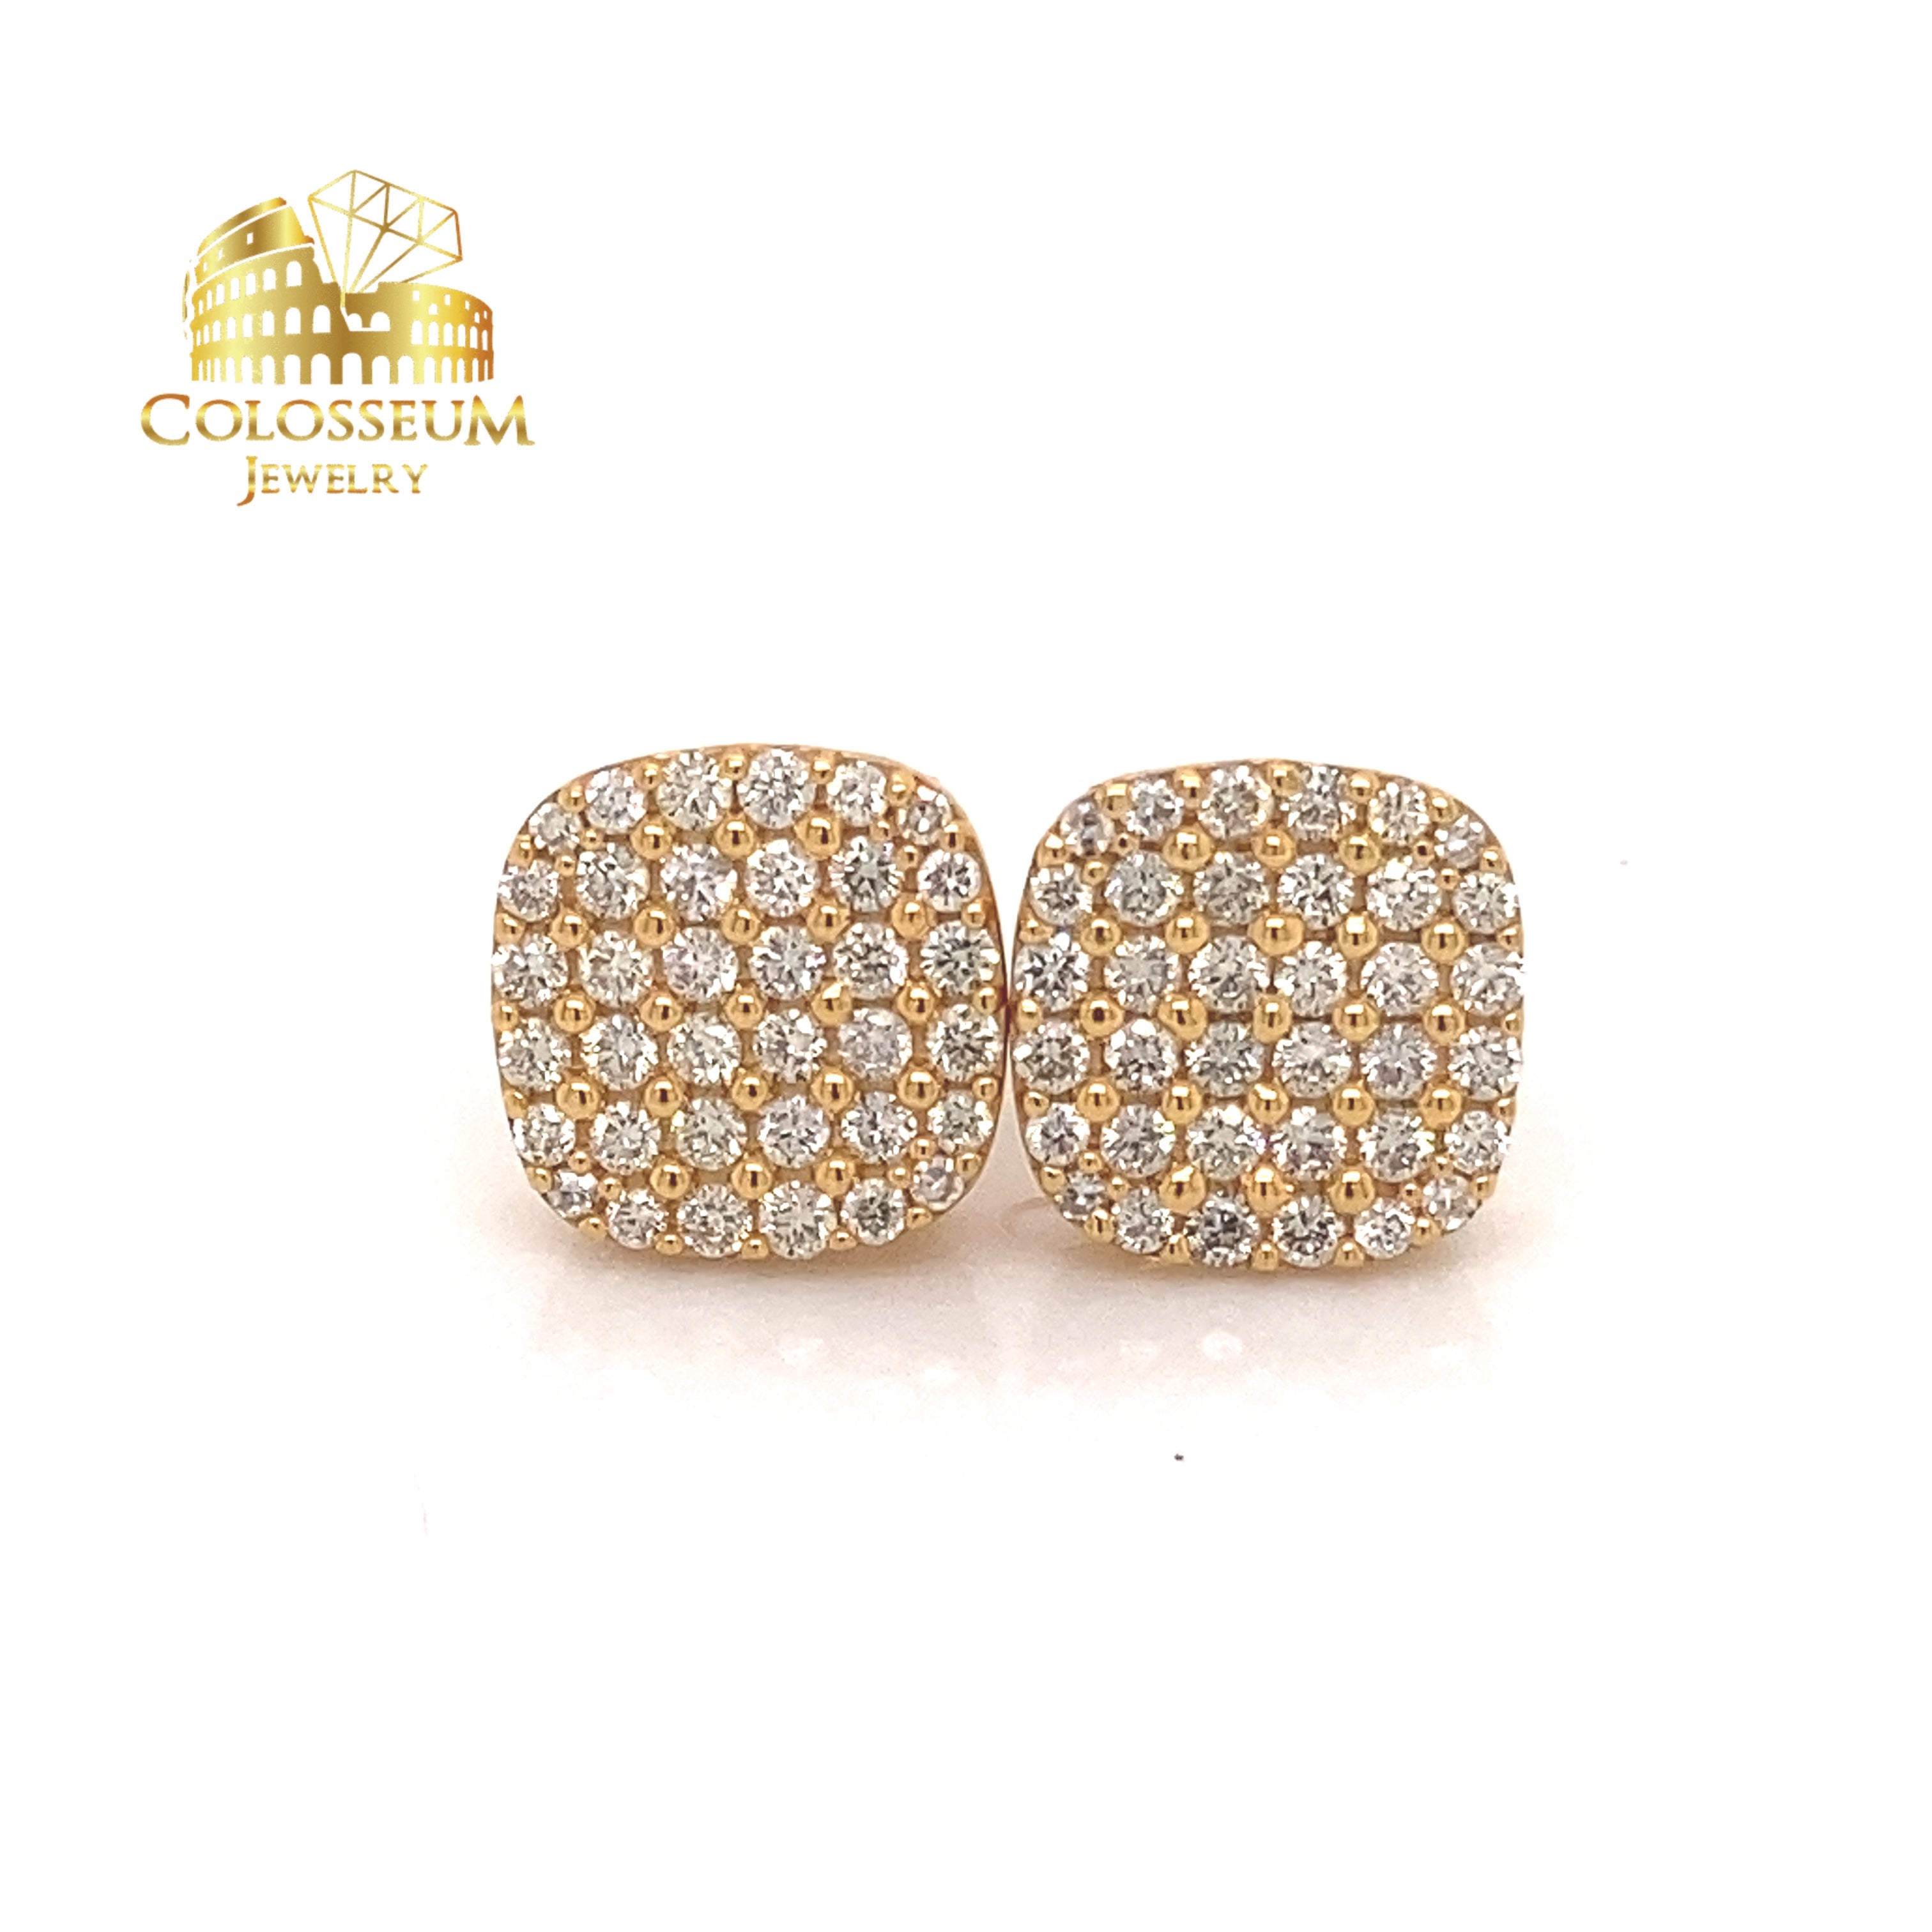 10K Yellow Gold Square Cluster Diamond Stud Earrings - 1.0ctw